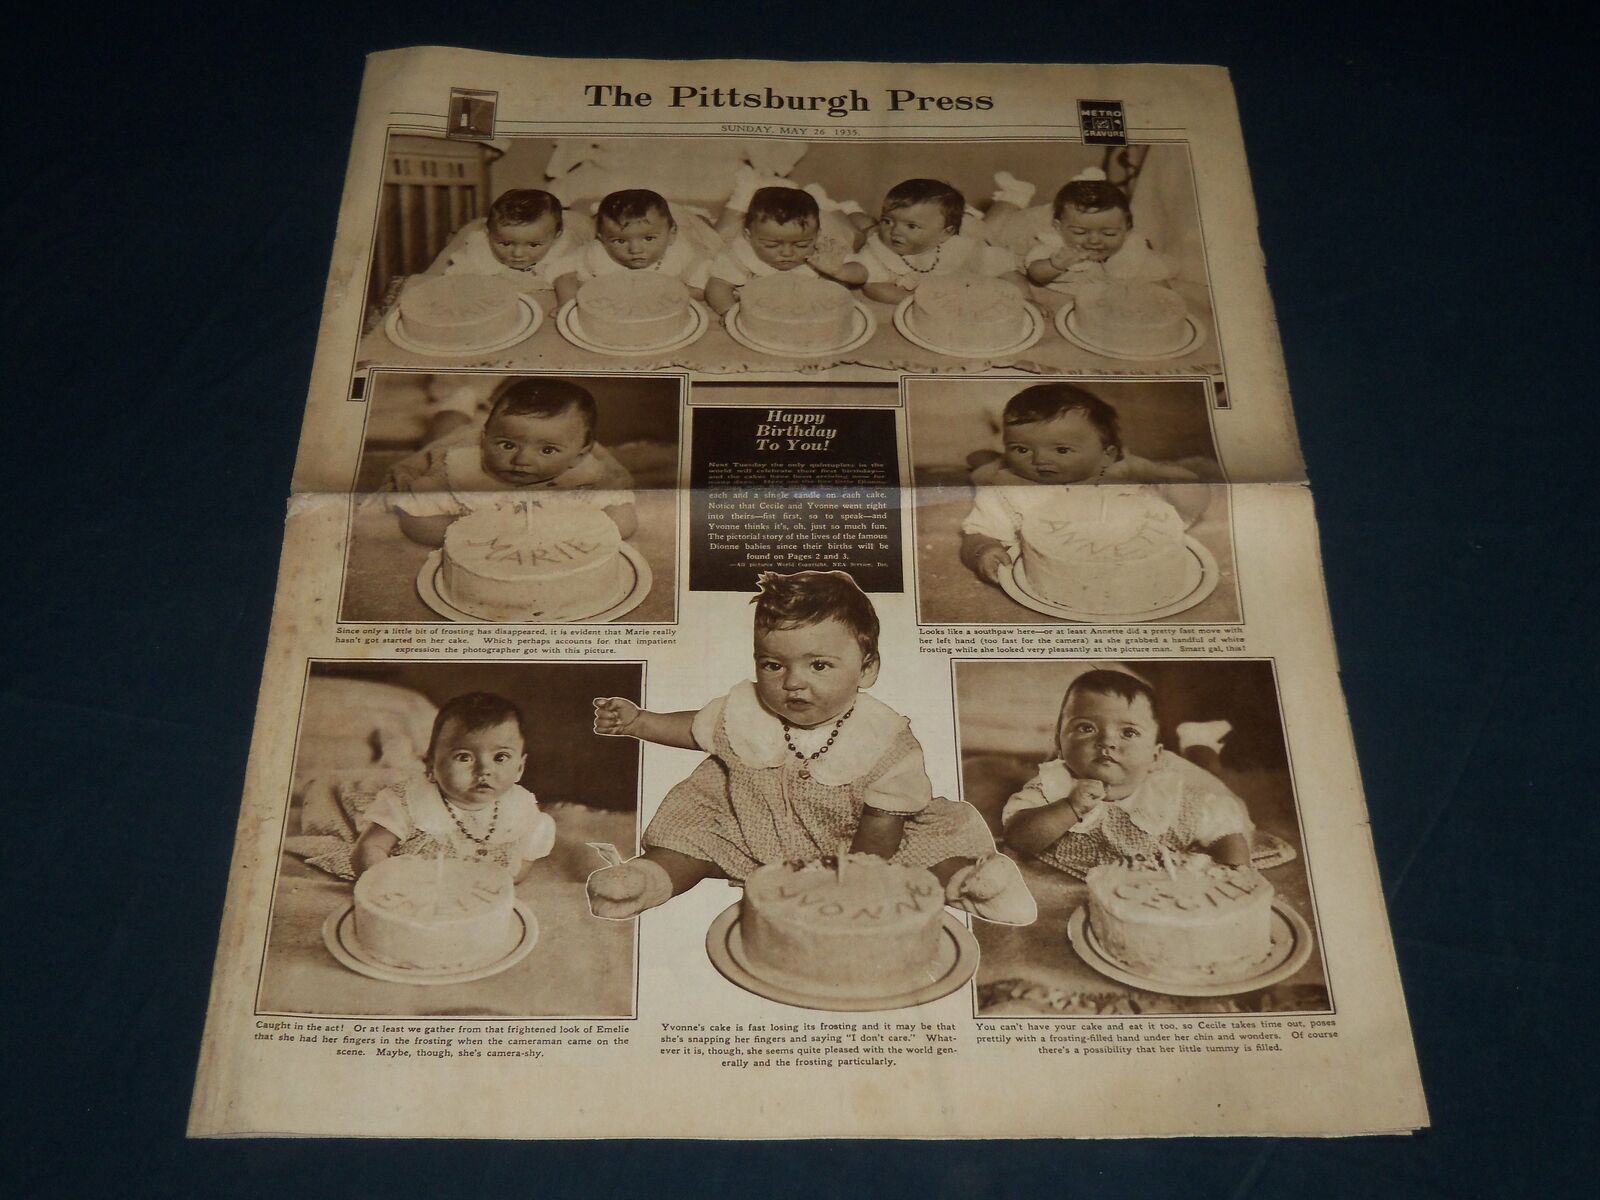 1935 MAY 26 THE PITTSBURGH PRESS SUNDAY METRO GRAVURE - DIONEE QUINTS - NP 4543